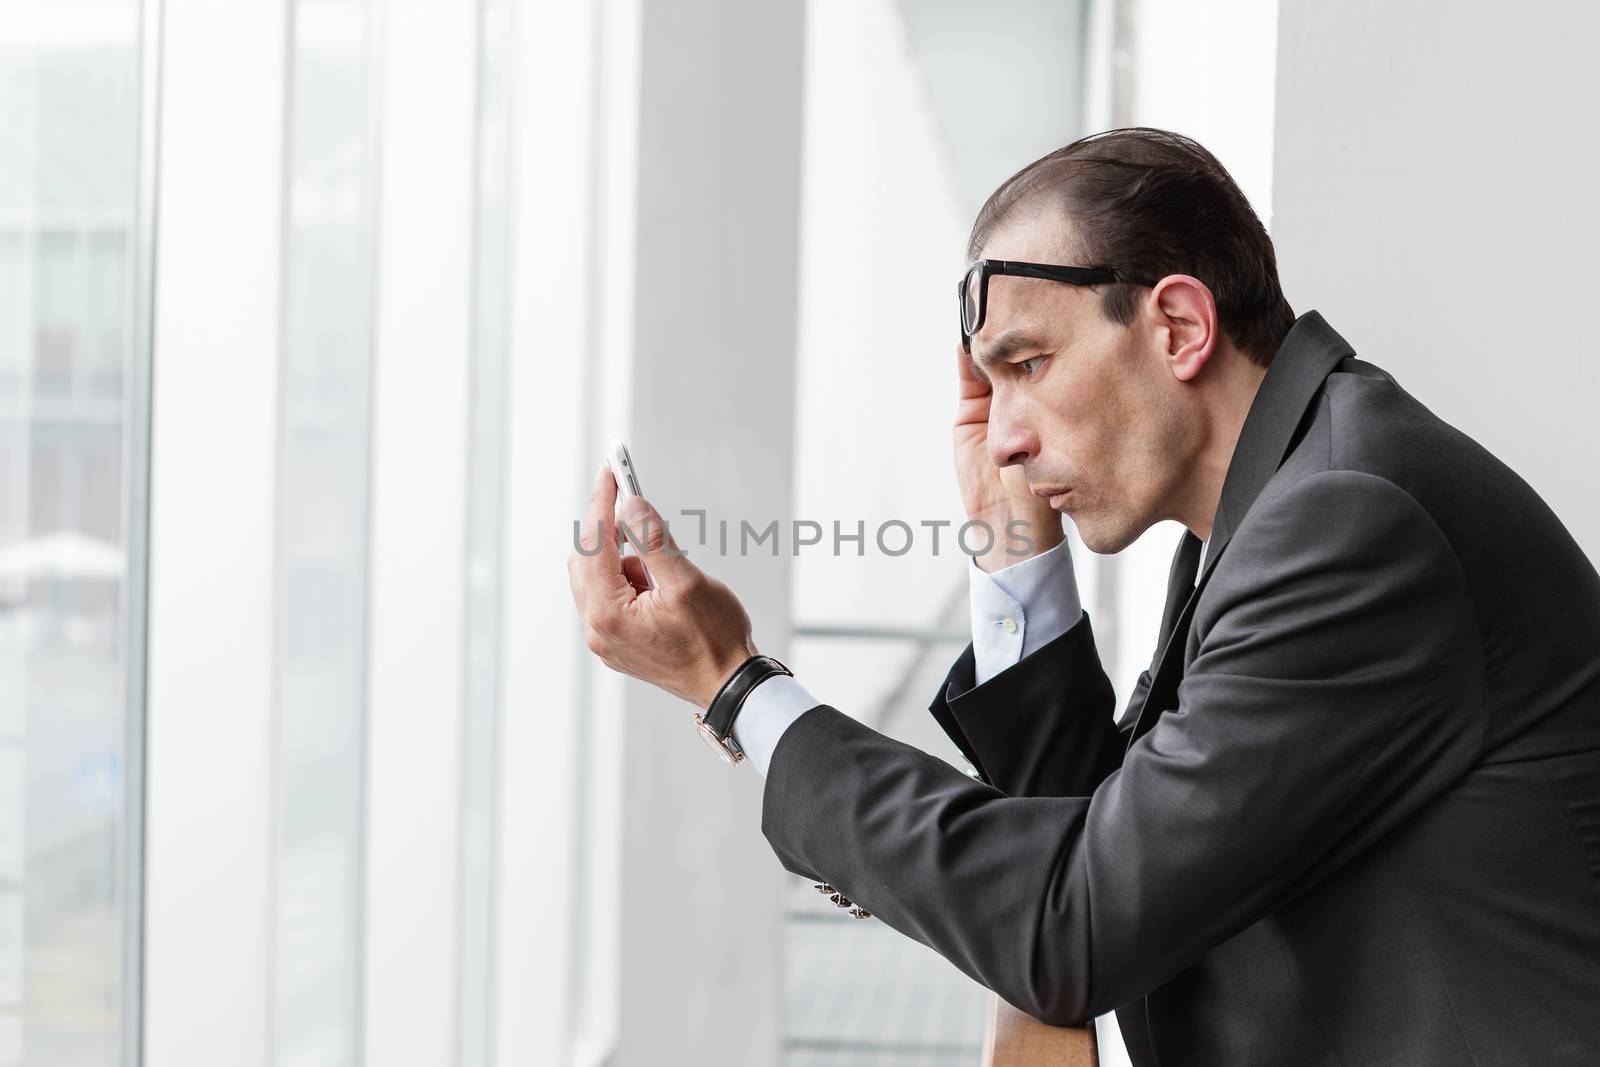 Poor eyesight Businessman trying to watch his phone display